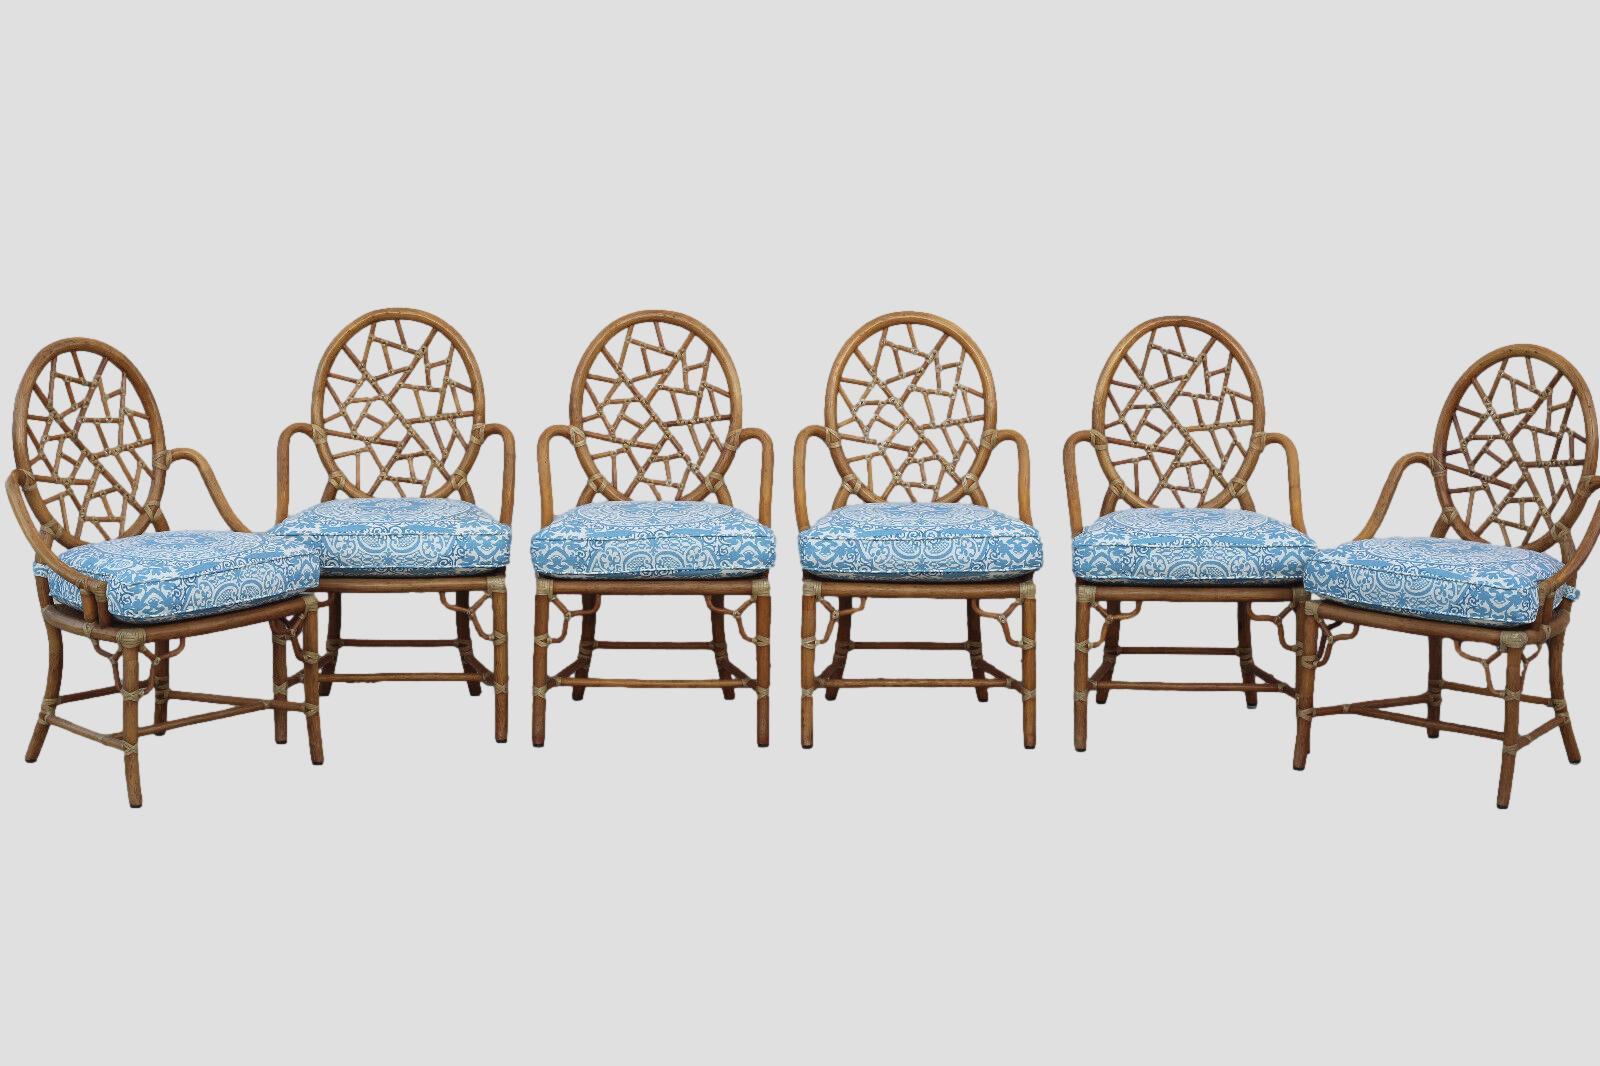 American Elinor McGuire Iconic Cracked Ice Dining Chairs, a Set of 6 For Sale